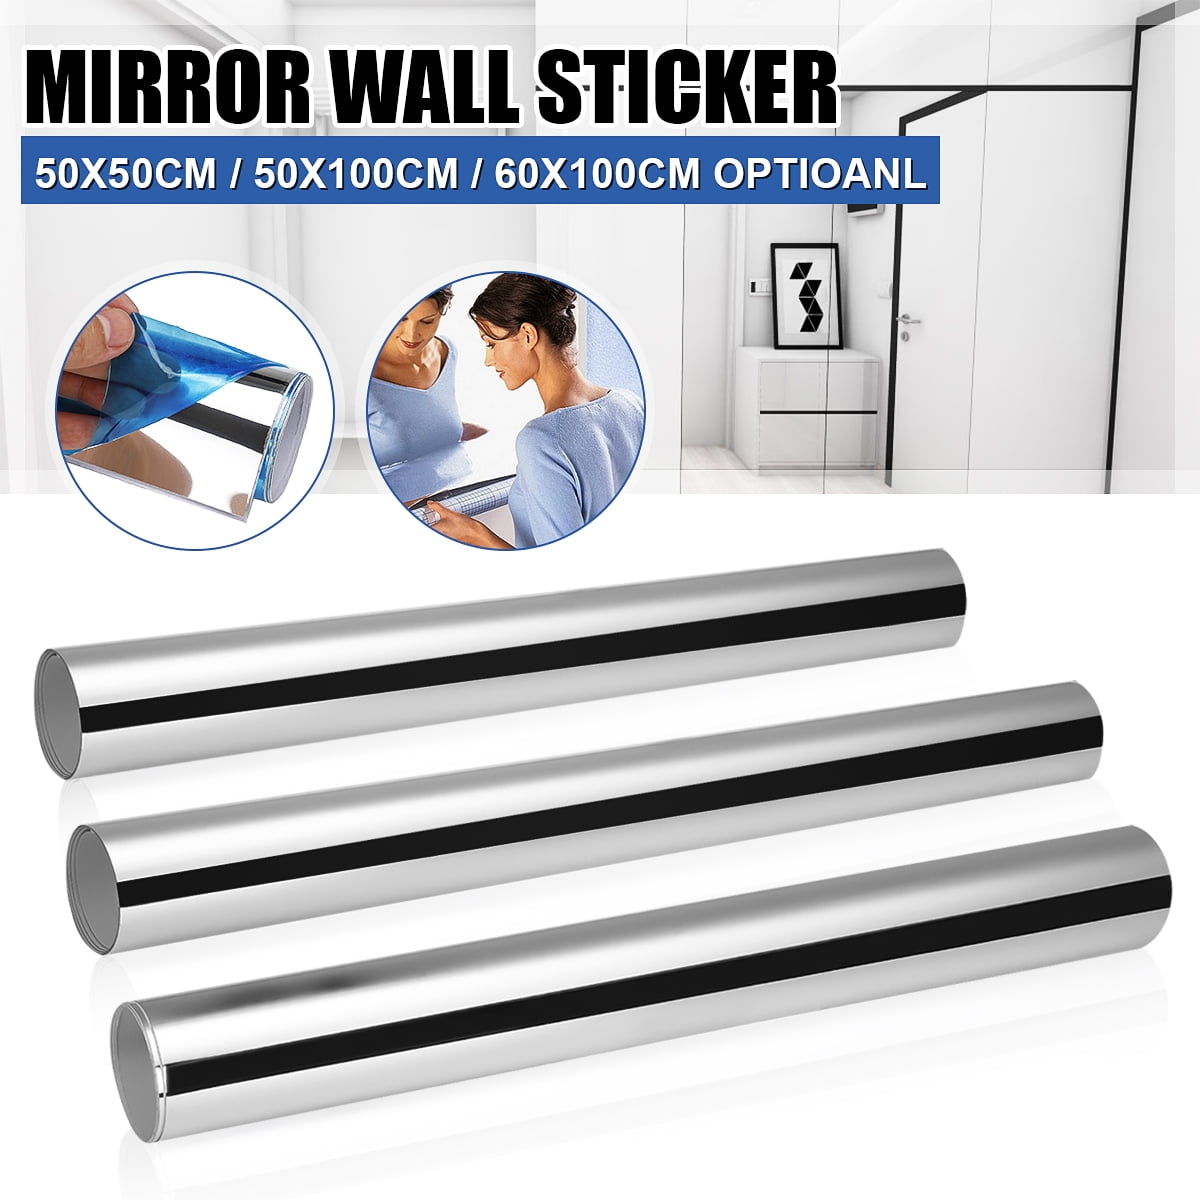 Details about   6 x 9 Inch Mirror Sheets Self Adhesive Non Glass Mirror Tiles Wall Sticky 10 PCs 